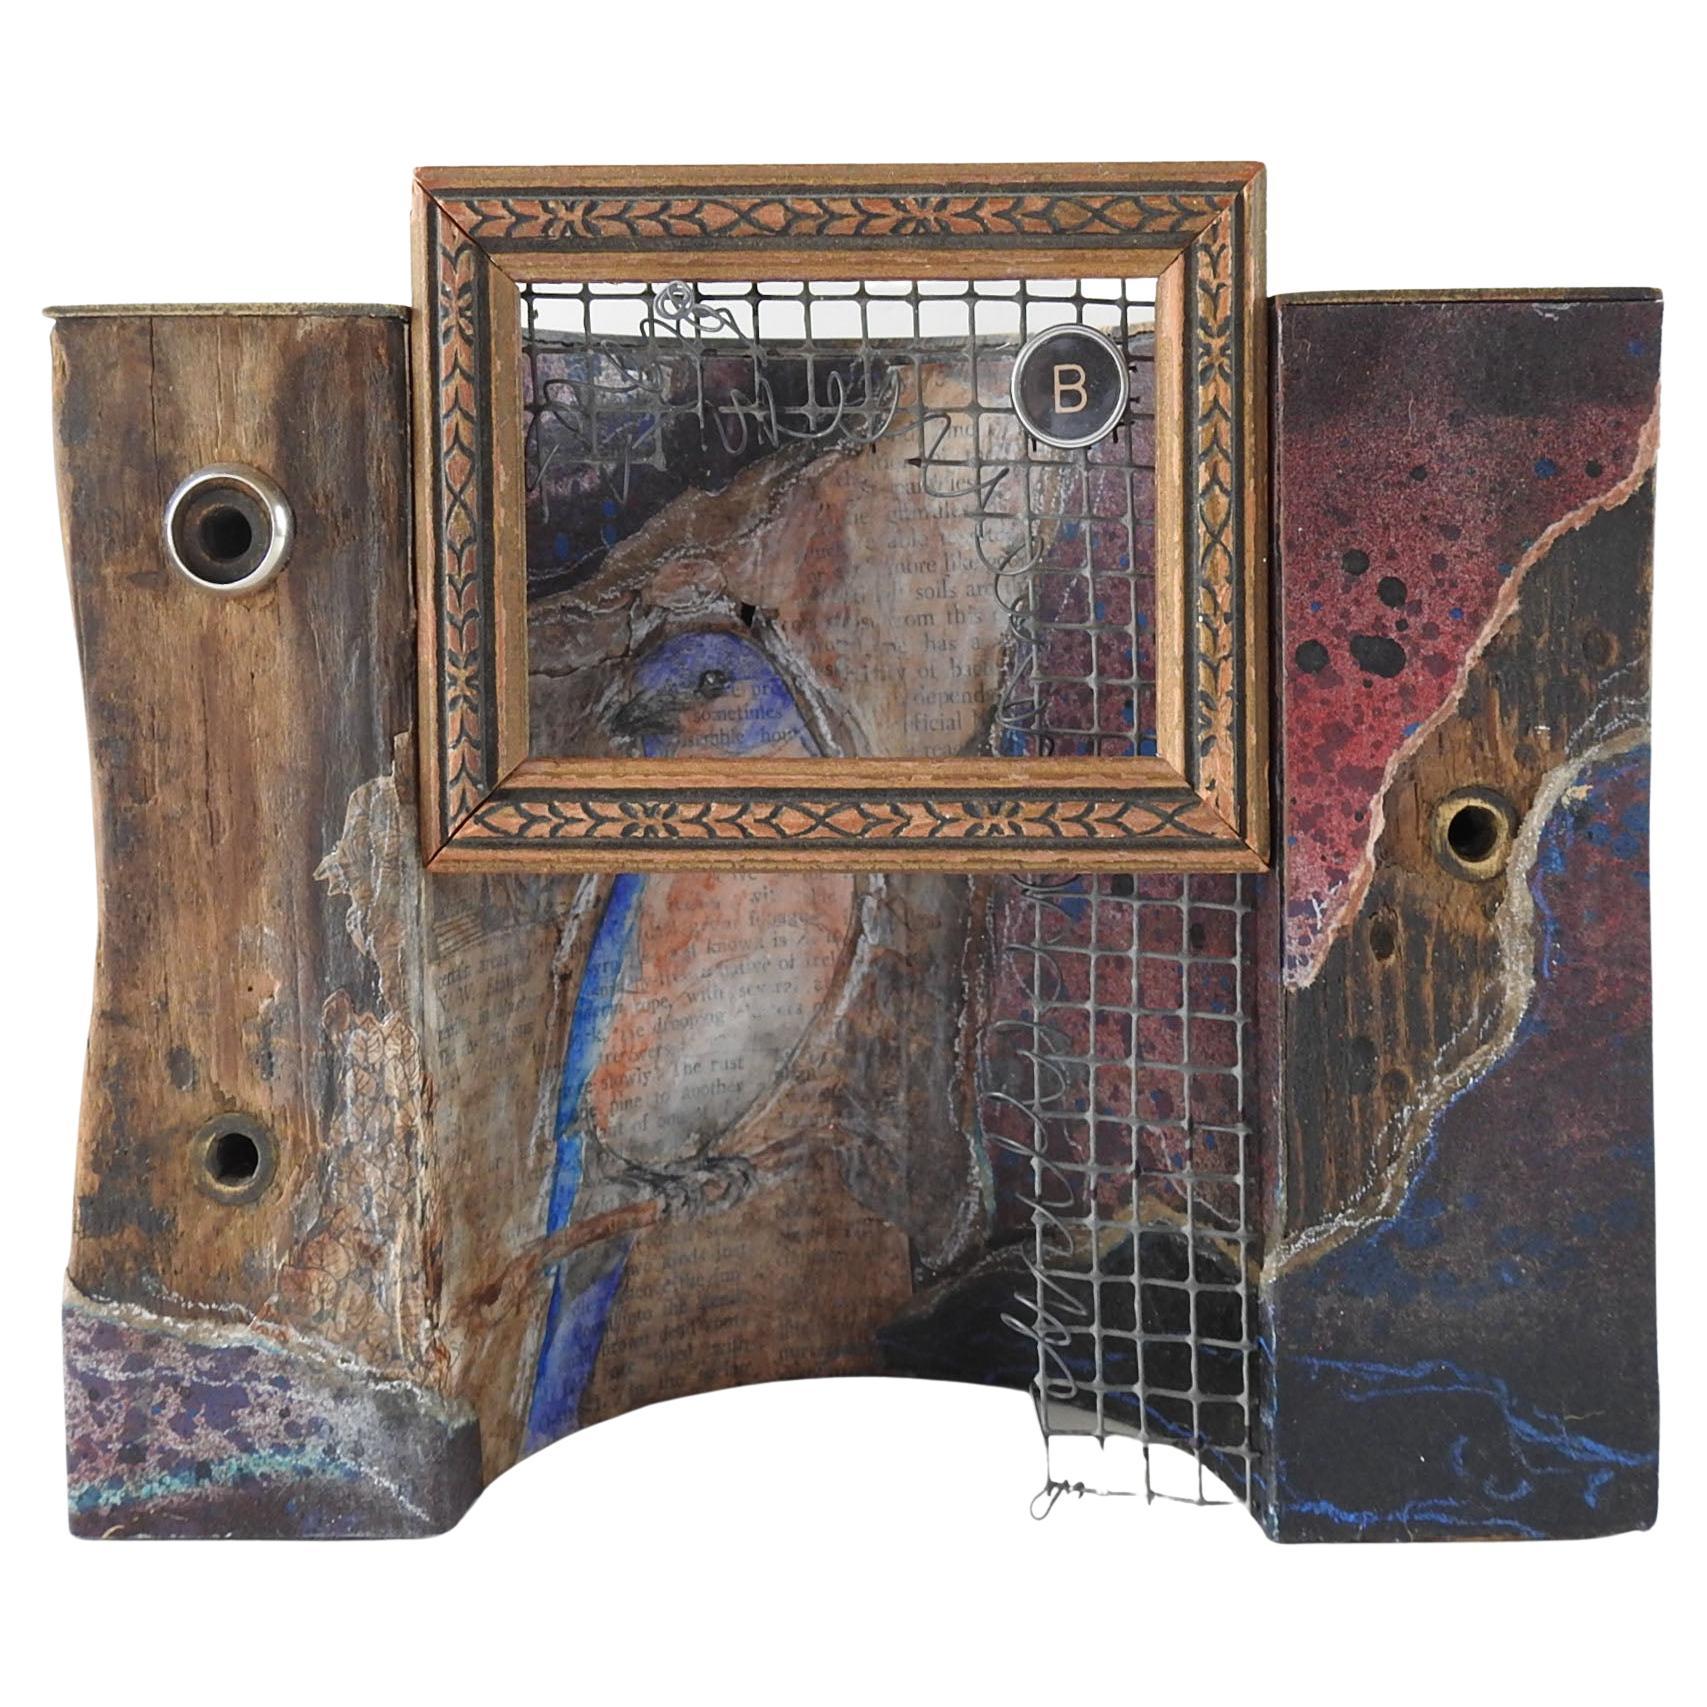 Bluebird Watercolor & Mixed Media Assemblage Sculpture For Sale